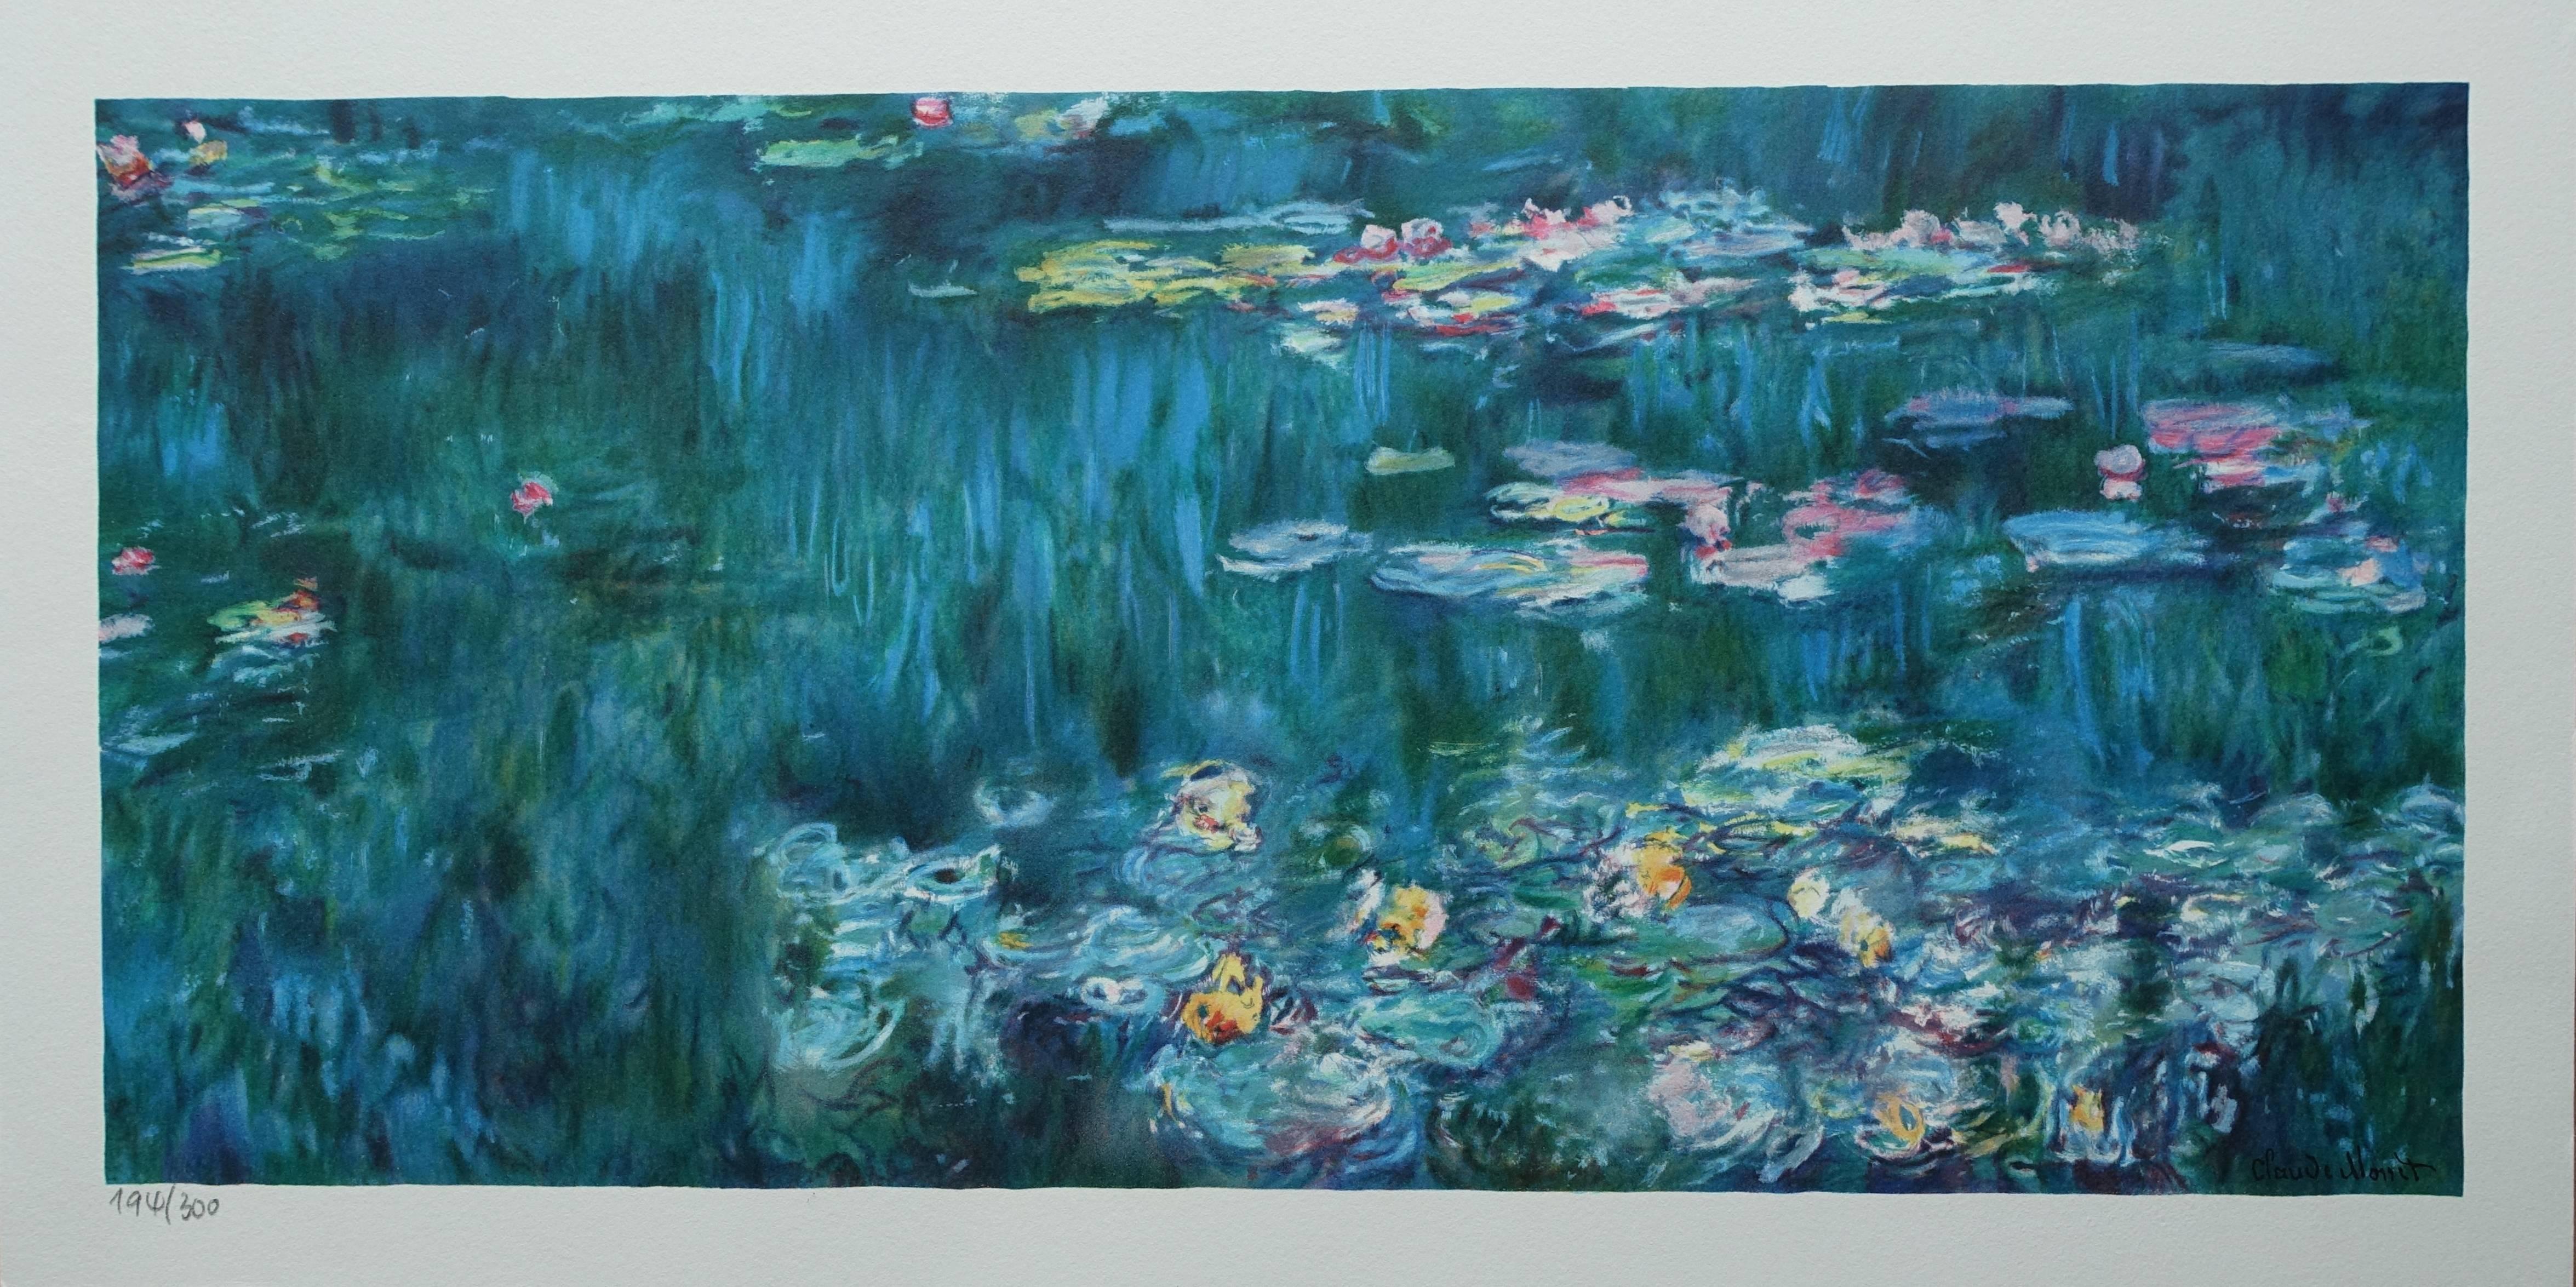 (after) Claude Monet Landscape Print - The Nymphs in Giverny - Lithograph - 300 copies